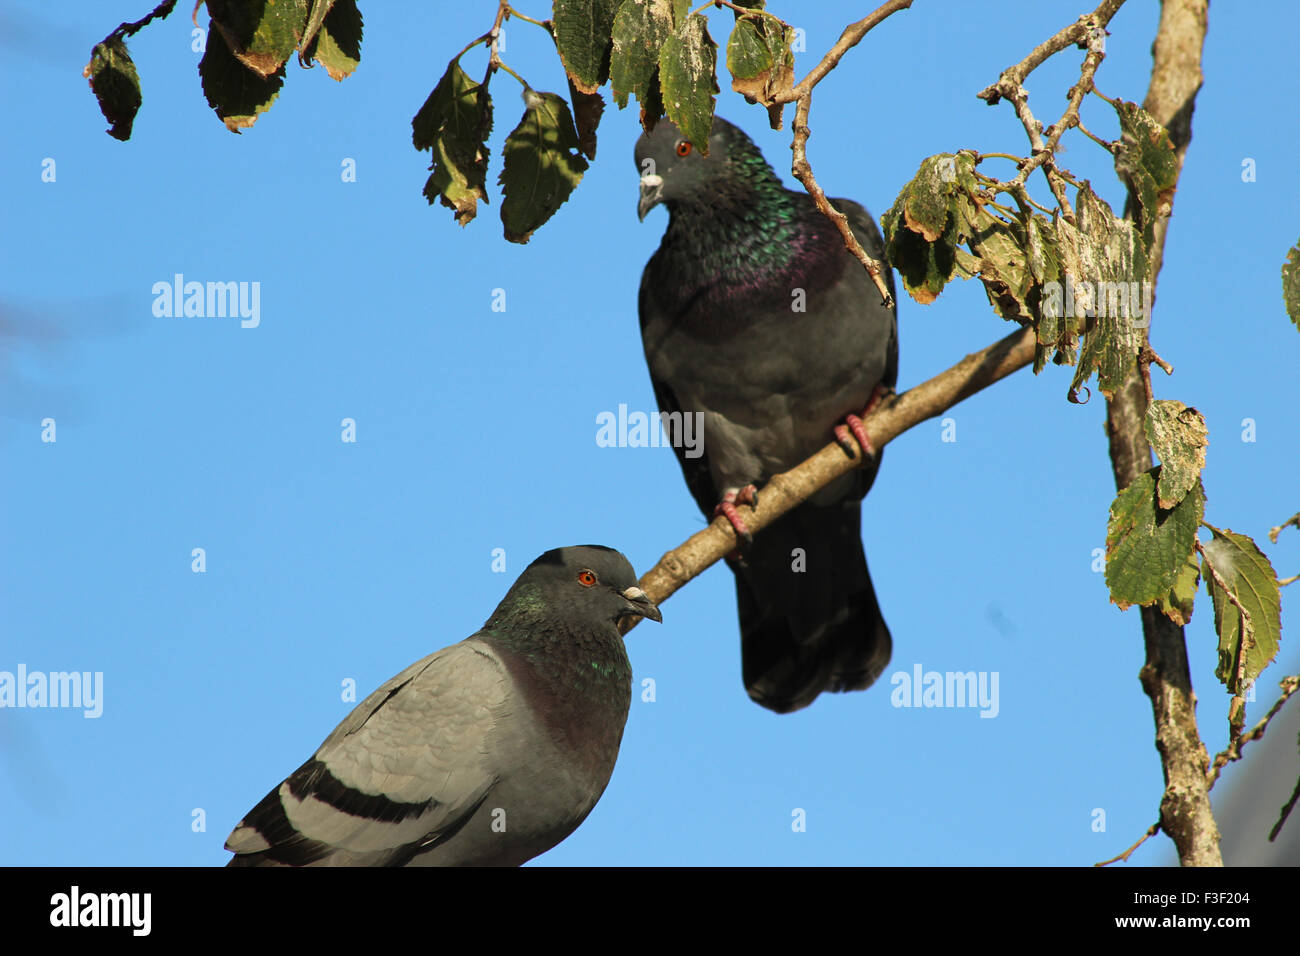 Pair of Pigeon sitting on tree branch and blue sky in the background Stock Photo